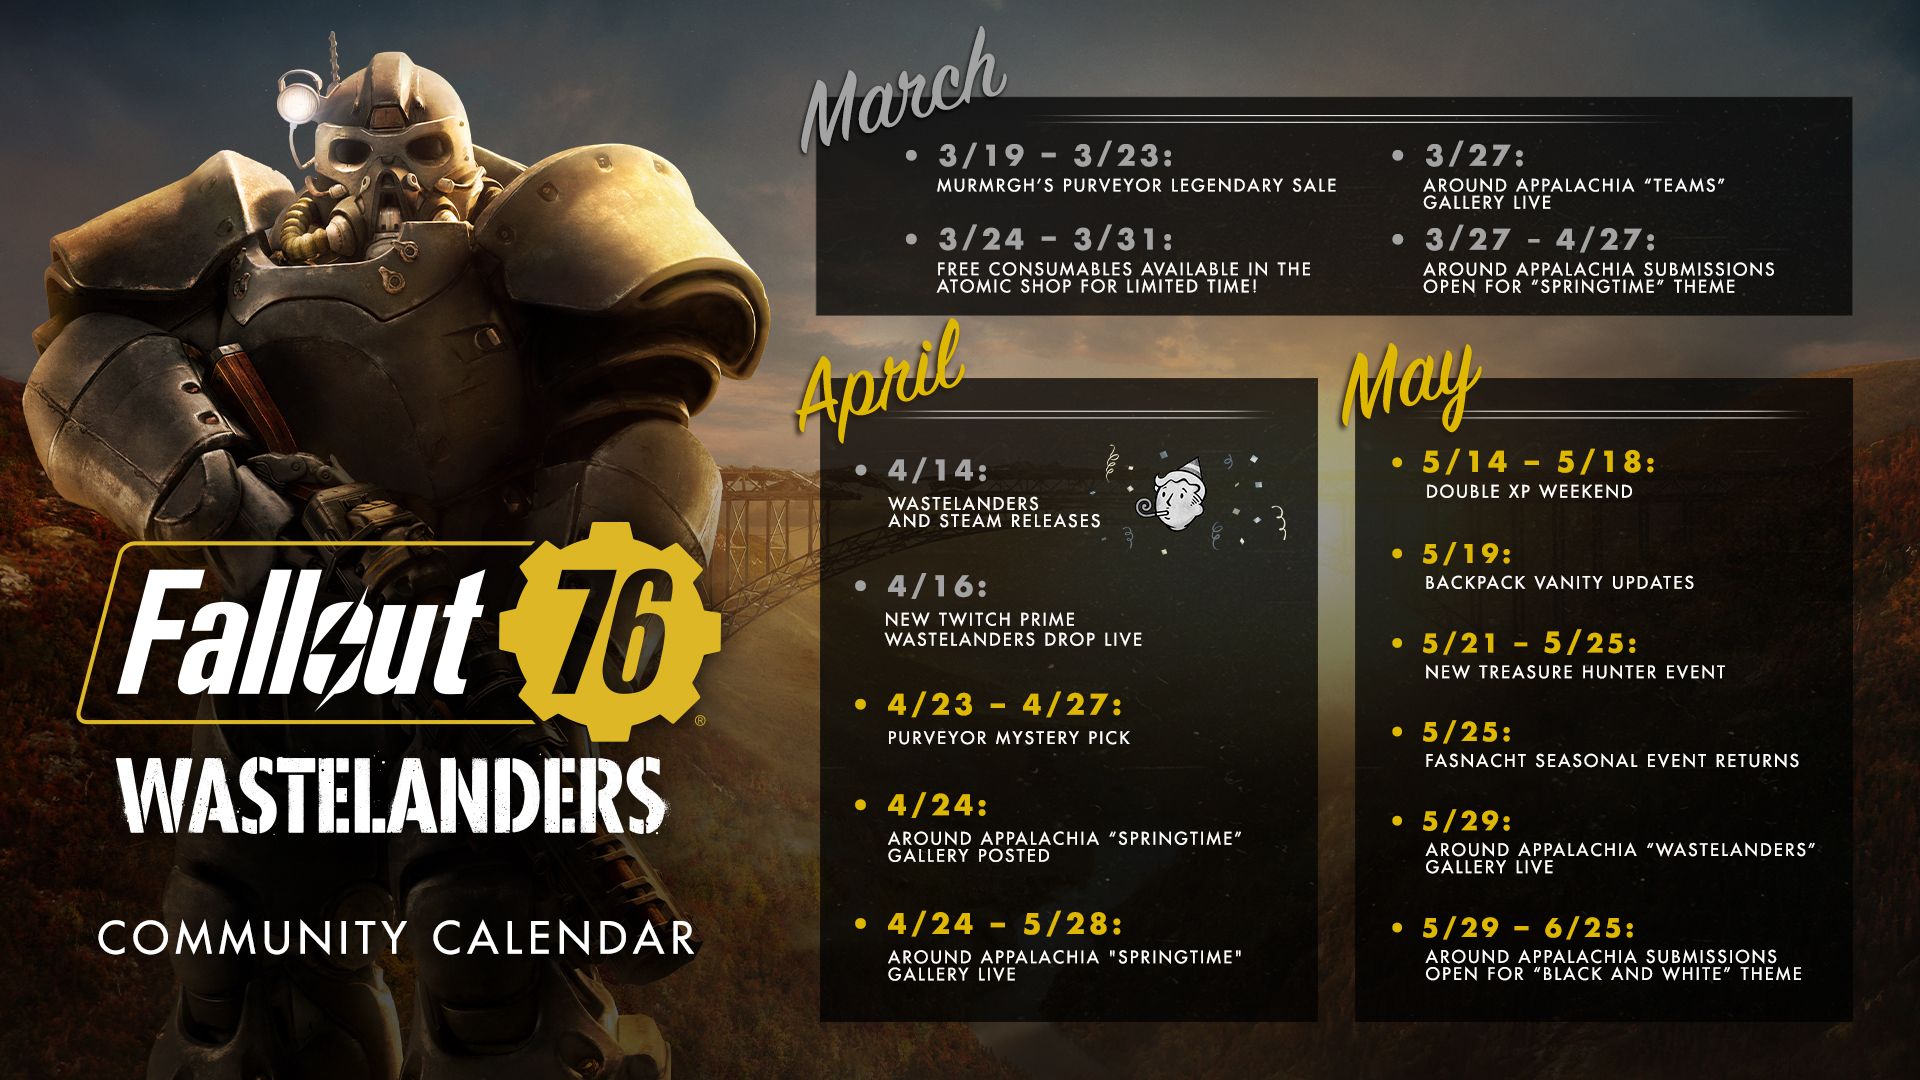 Fallout 76 Community Calendar Features Events for the Game